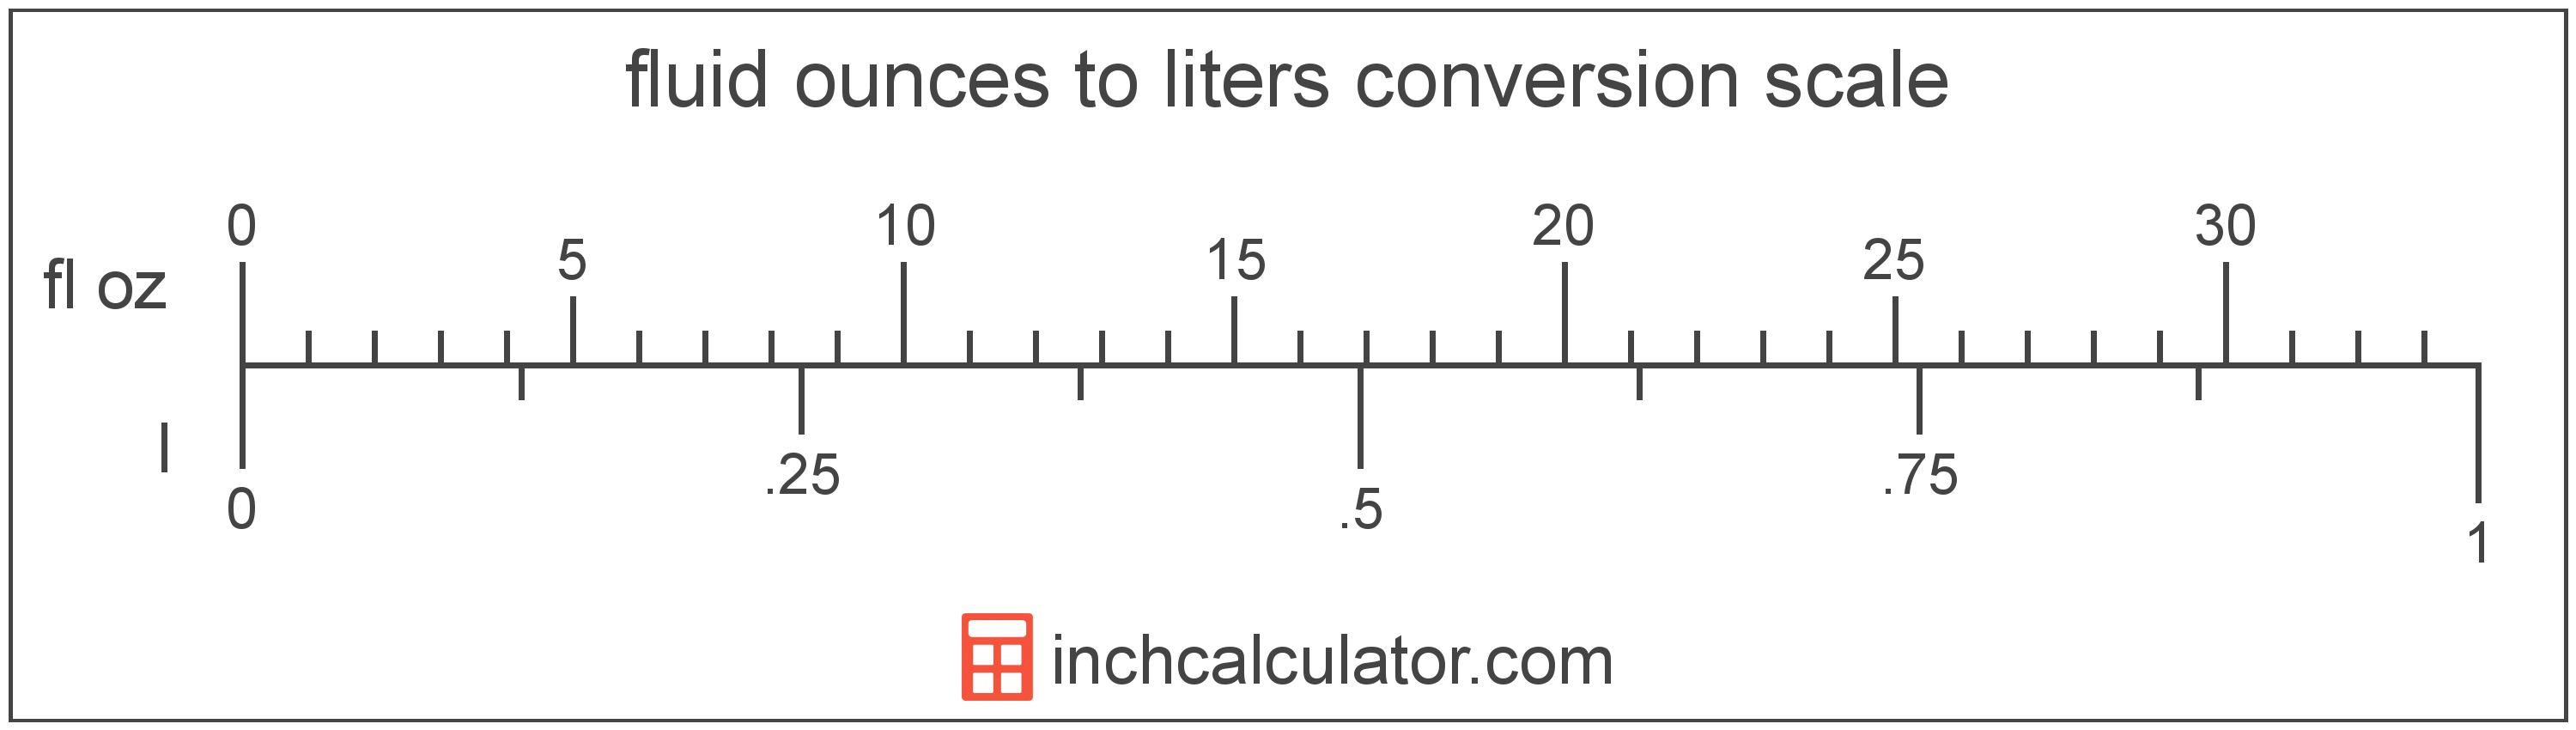 liters-to-fluid-ounces-conversion-l-to-fl-oz-inch-calculator